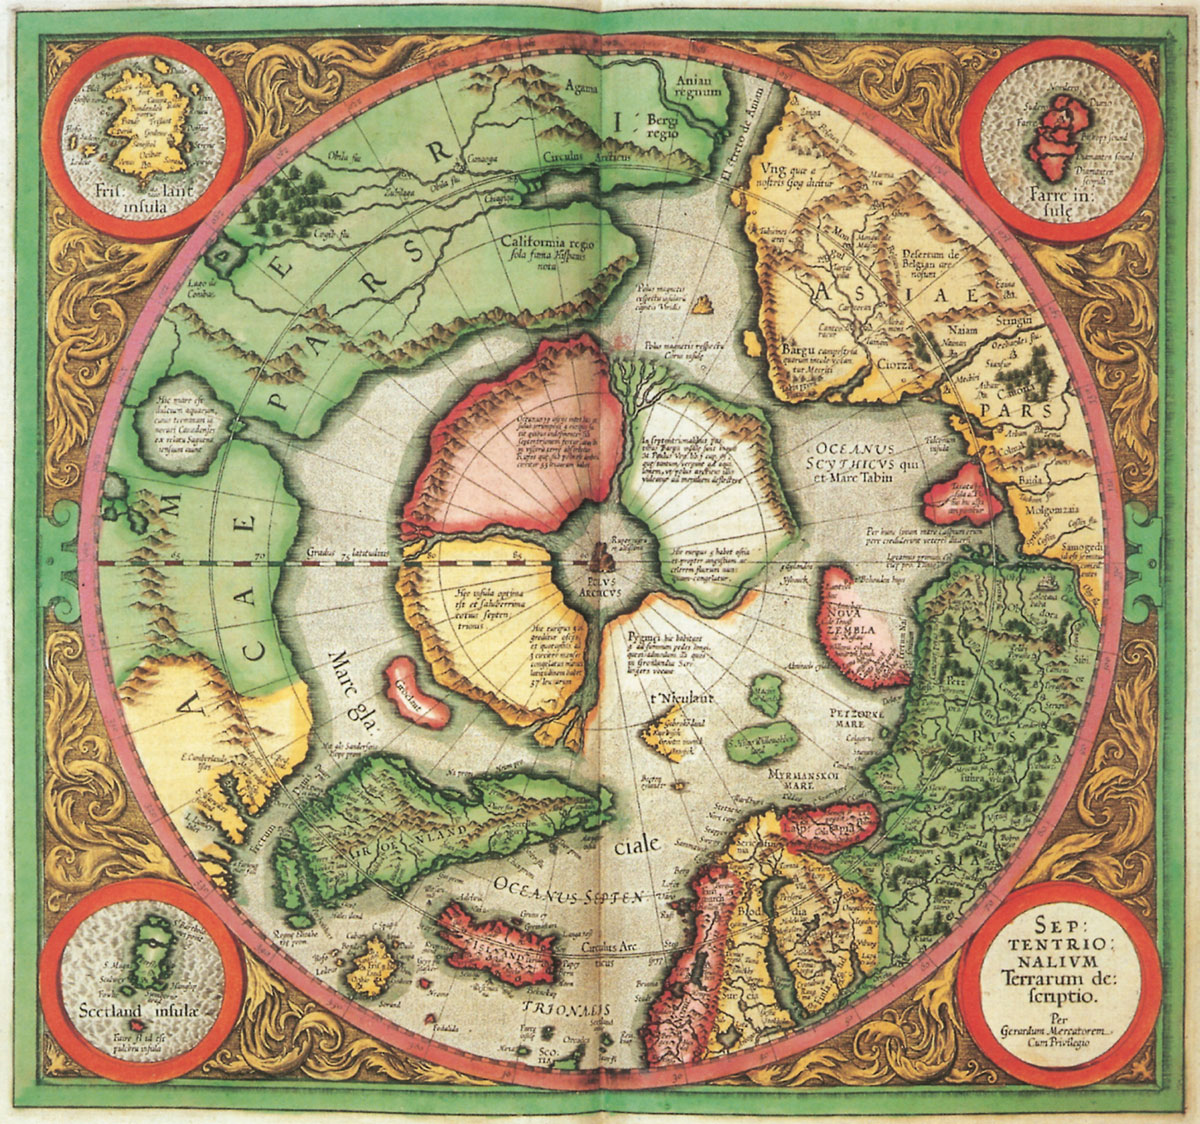 Mercator’s 1606 map of the Arctic. The upper-left corner prominently features Frisland.­